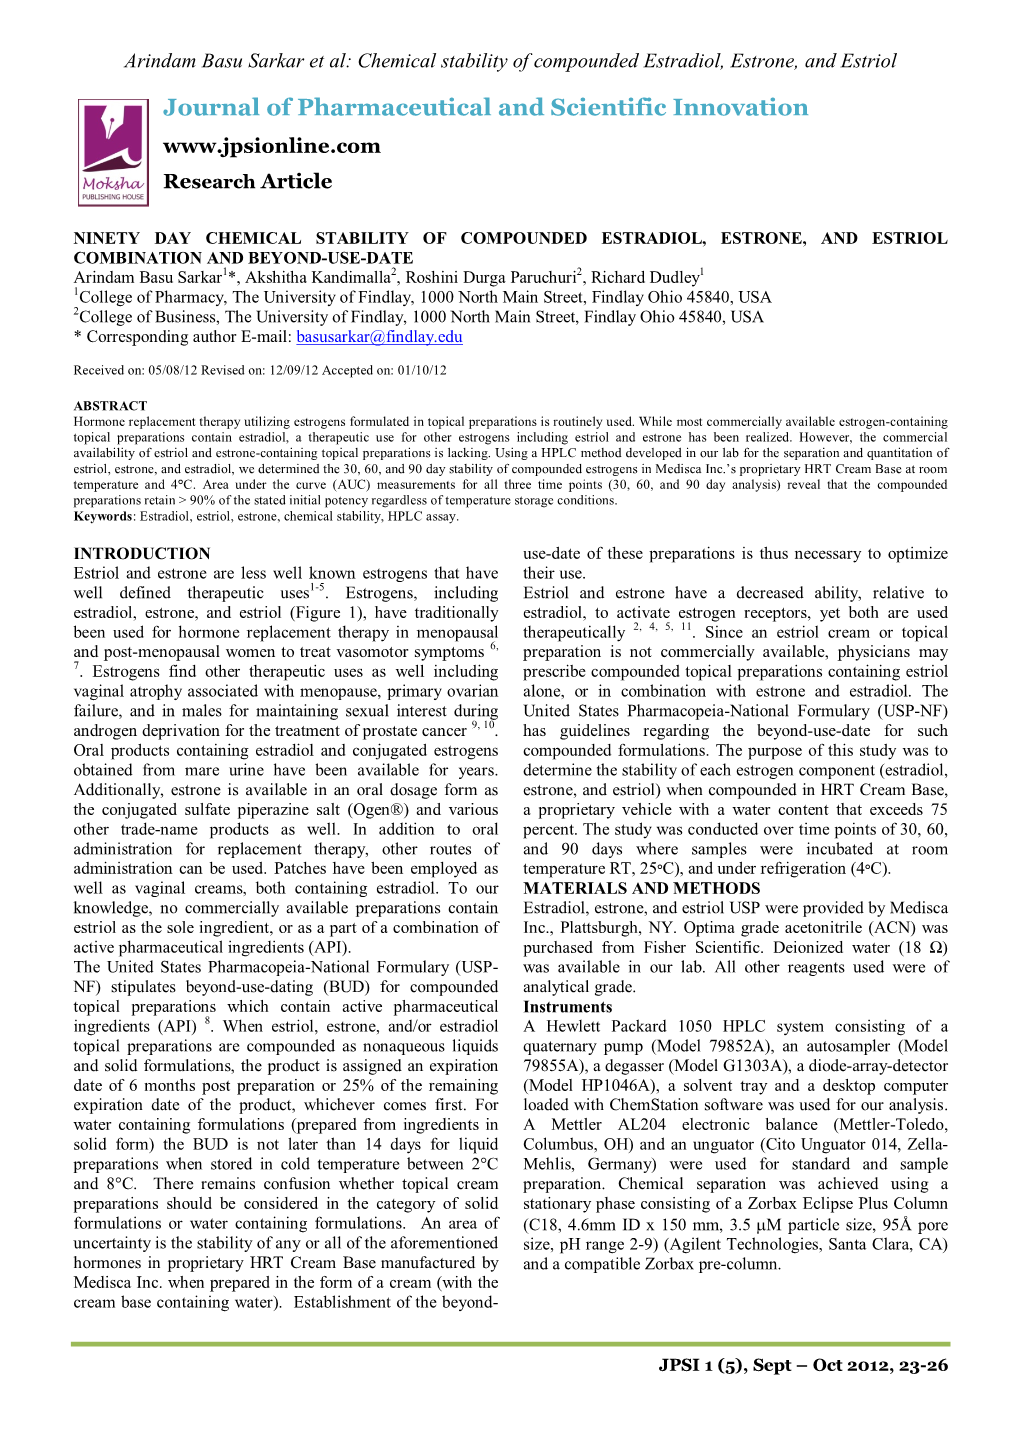 Chemical Stability of Compounded Estradiol, Estrone, and Estriol